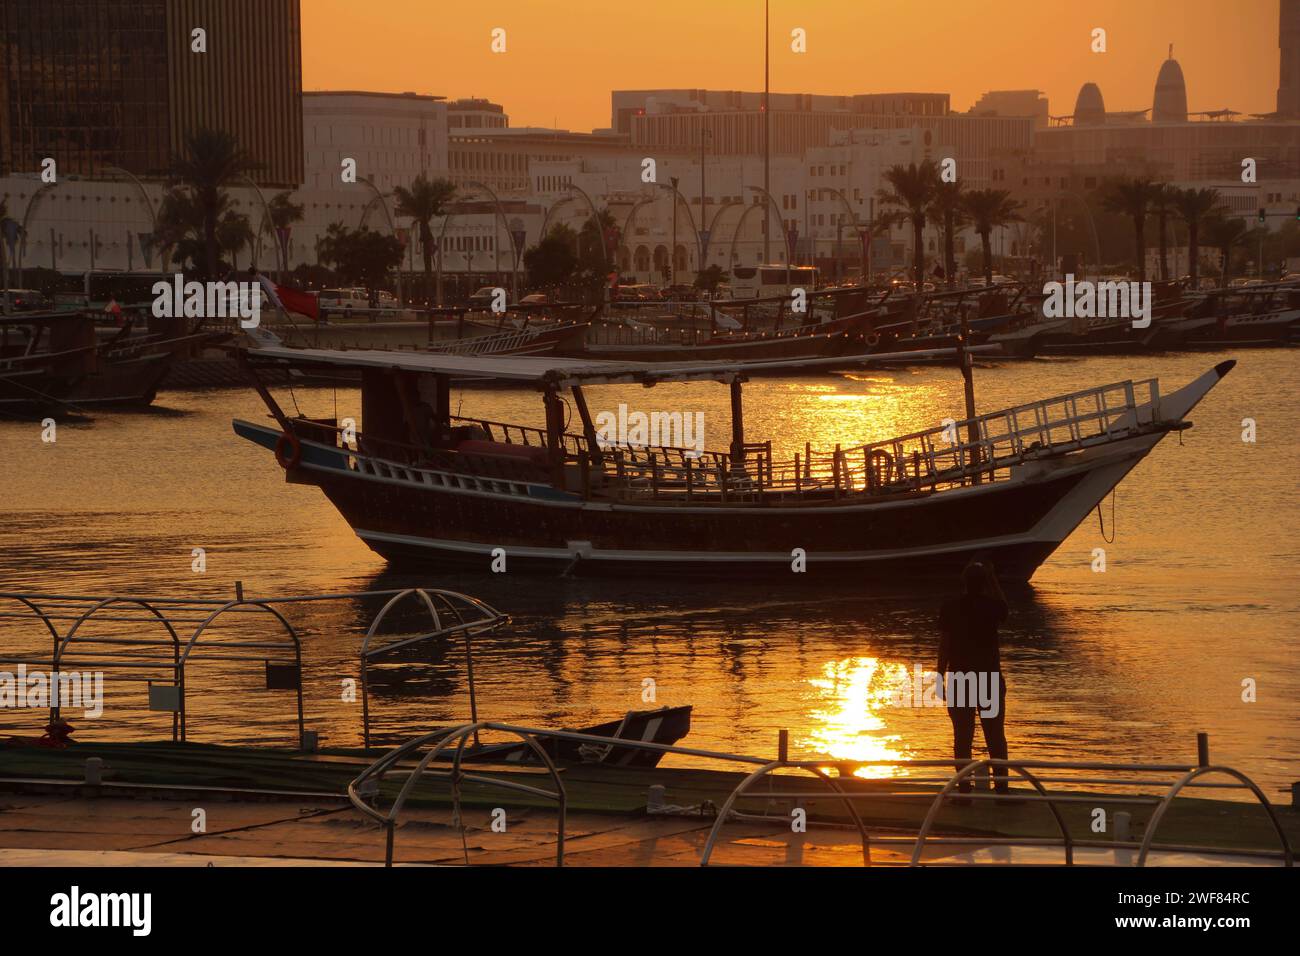 Dhow boat cruise during the sunset Stock Photo